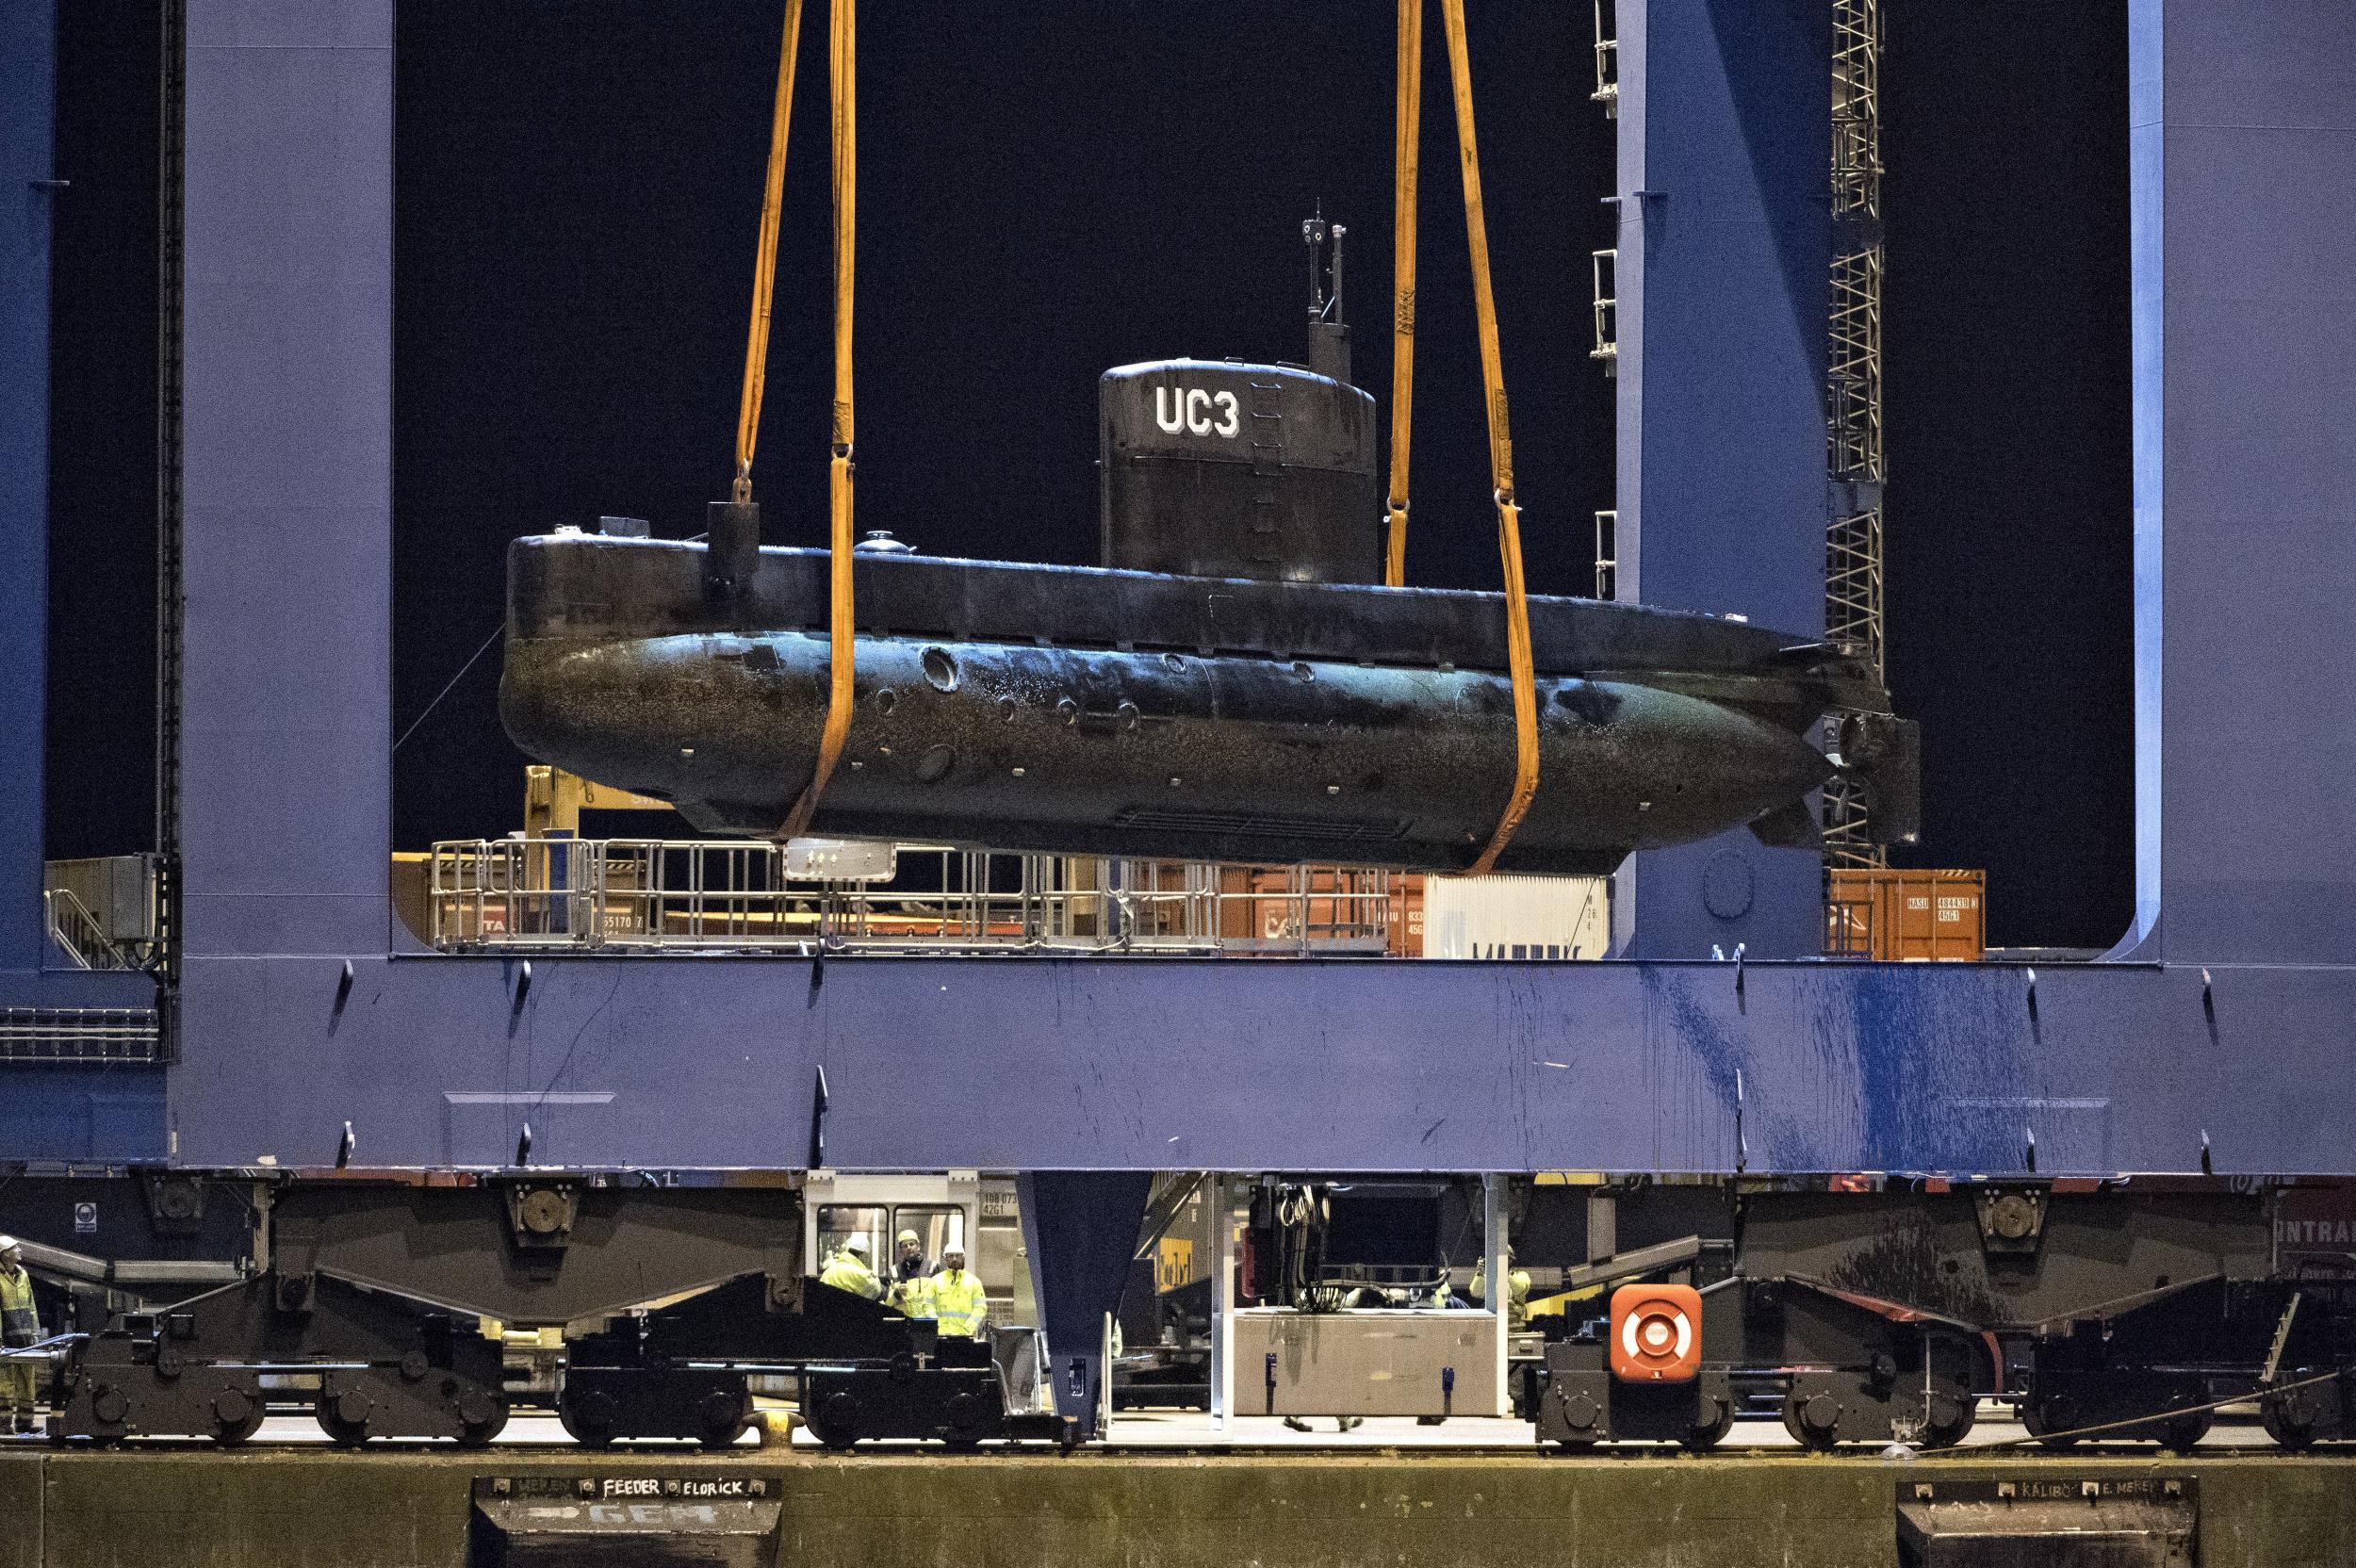 Mr Madsen's submarine, which was recovered following Ms Wall's death last August